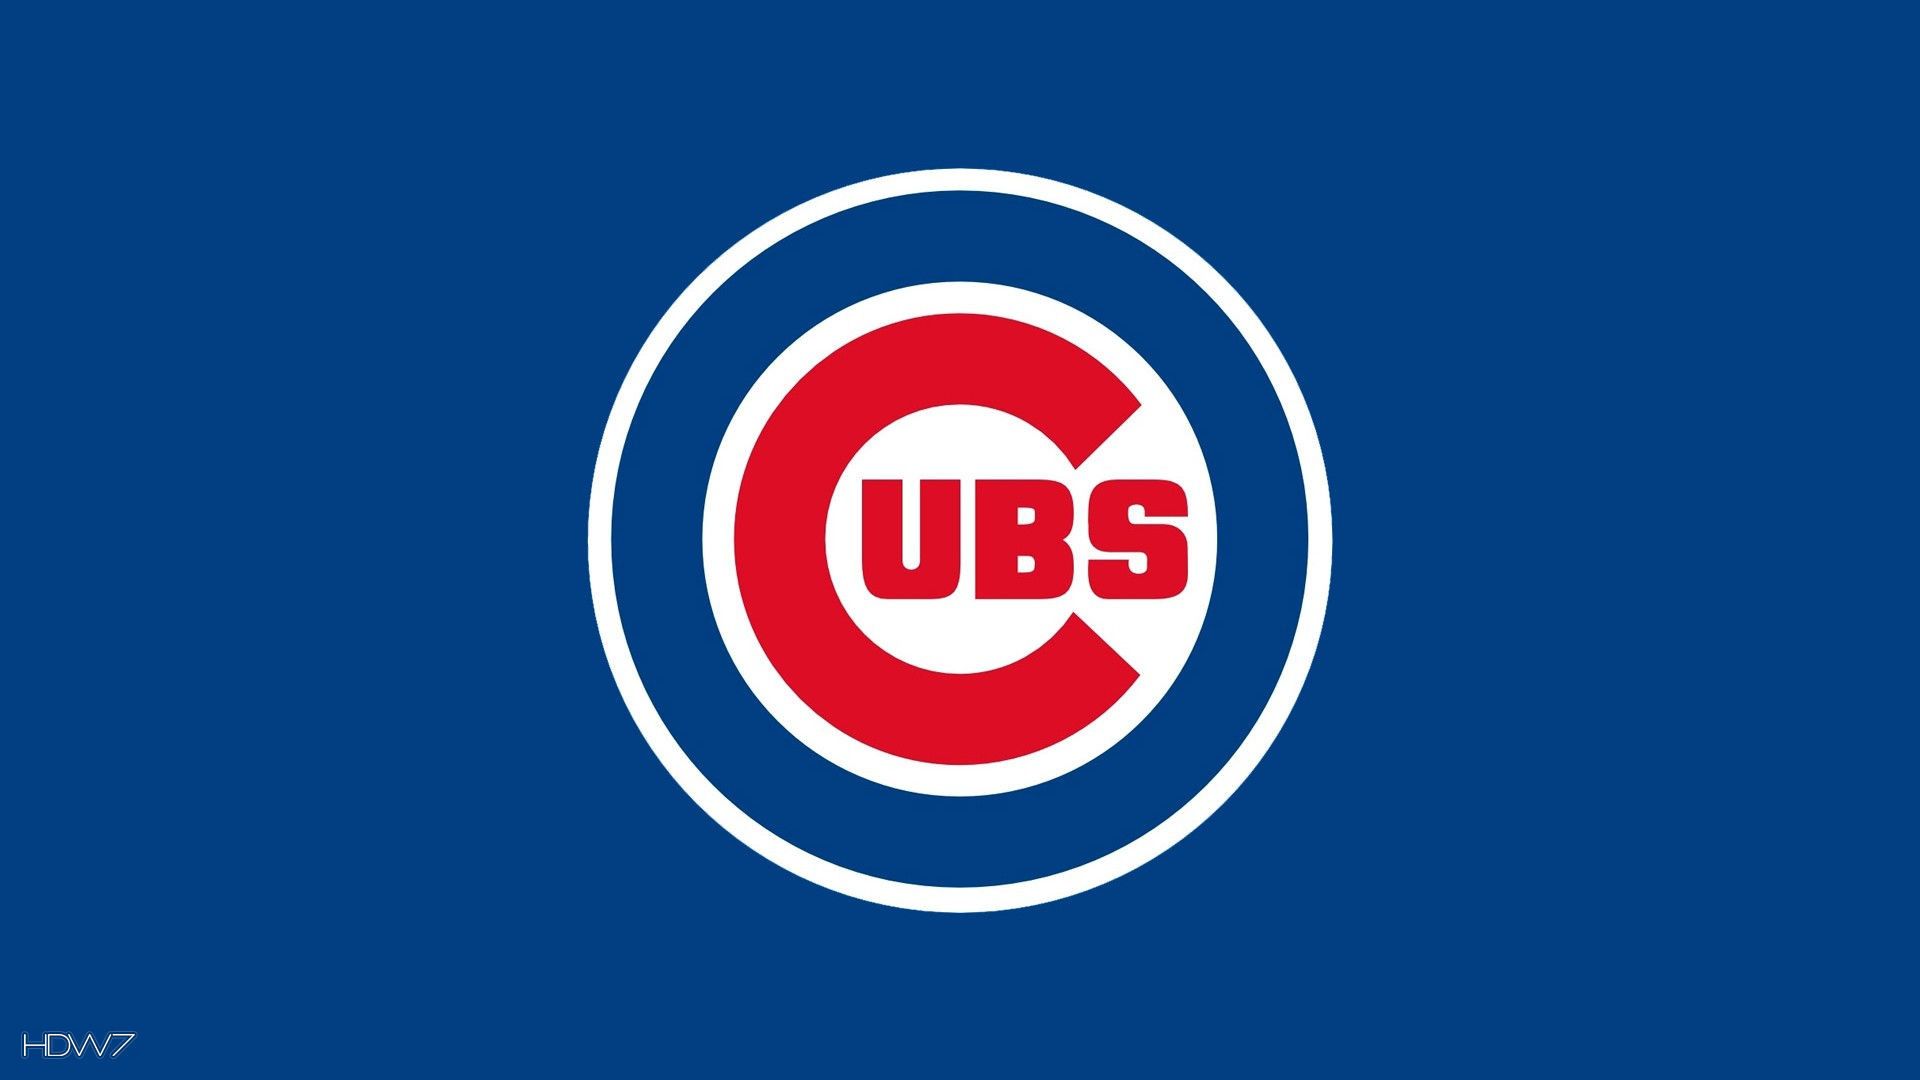 Chicago Cubs Wallpaper Free Chicago Cubs Background